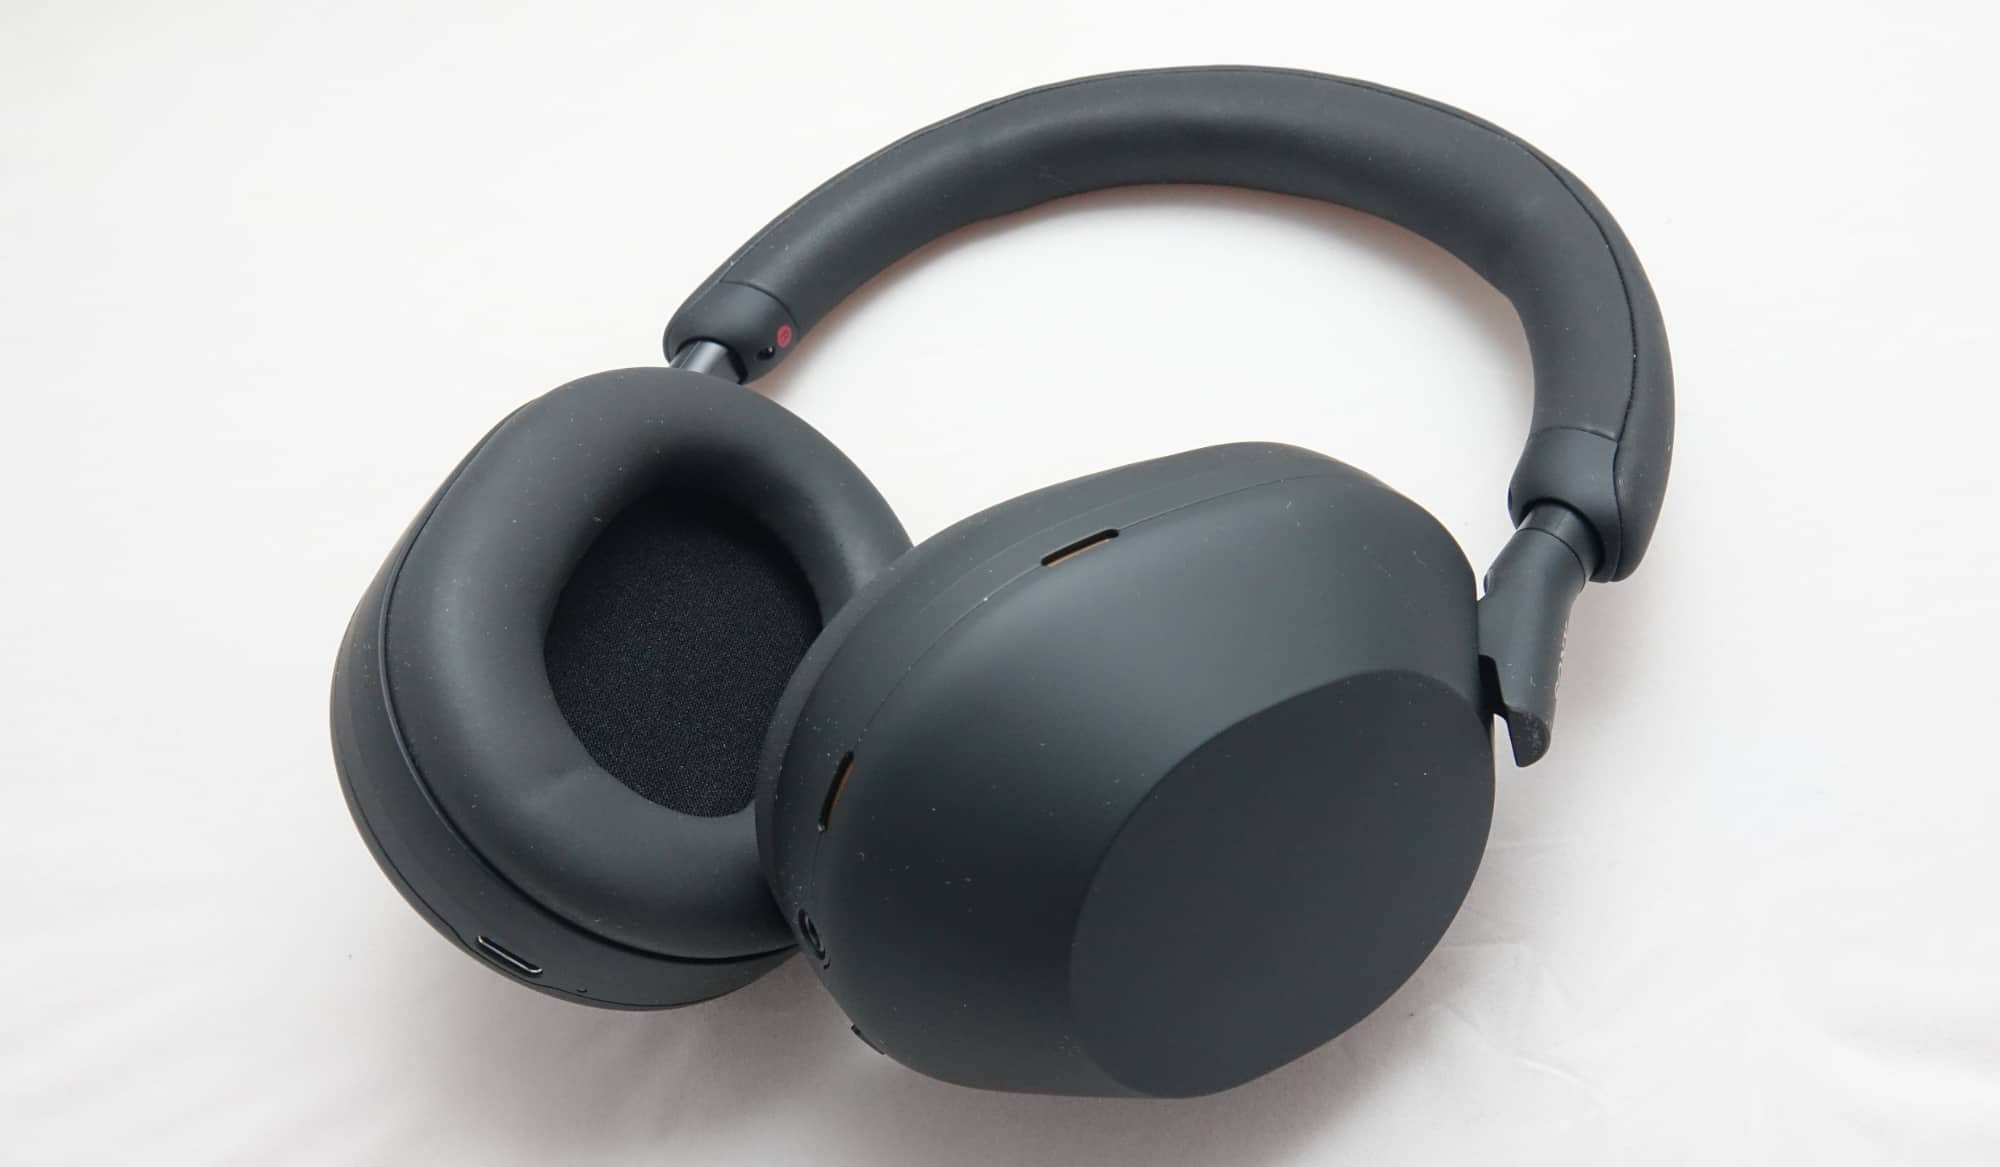 Best Headphones For Remote Work - Seamless Connectivity And Long Battery Life